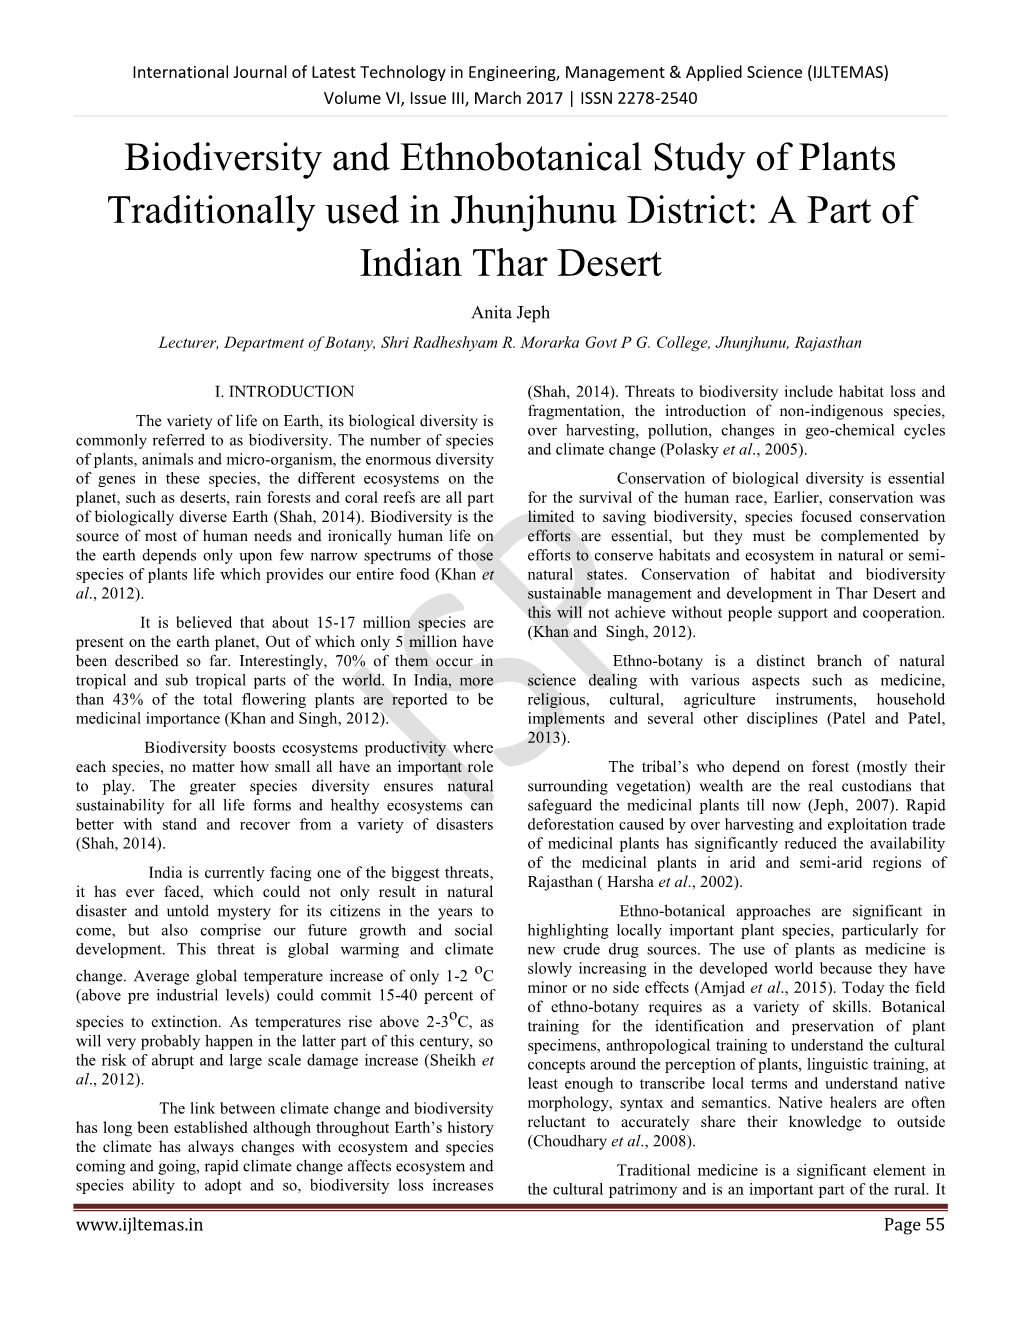 Biodiversity and Ethnobotanical Study of Plants Traditionally Used in Jhunjhunu District: a Part Of